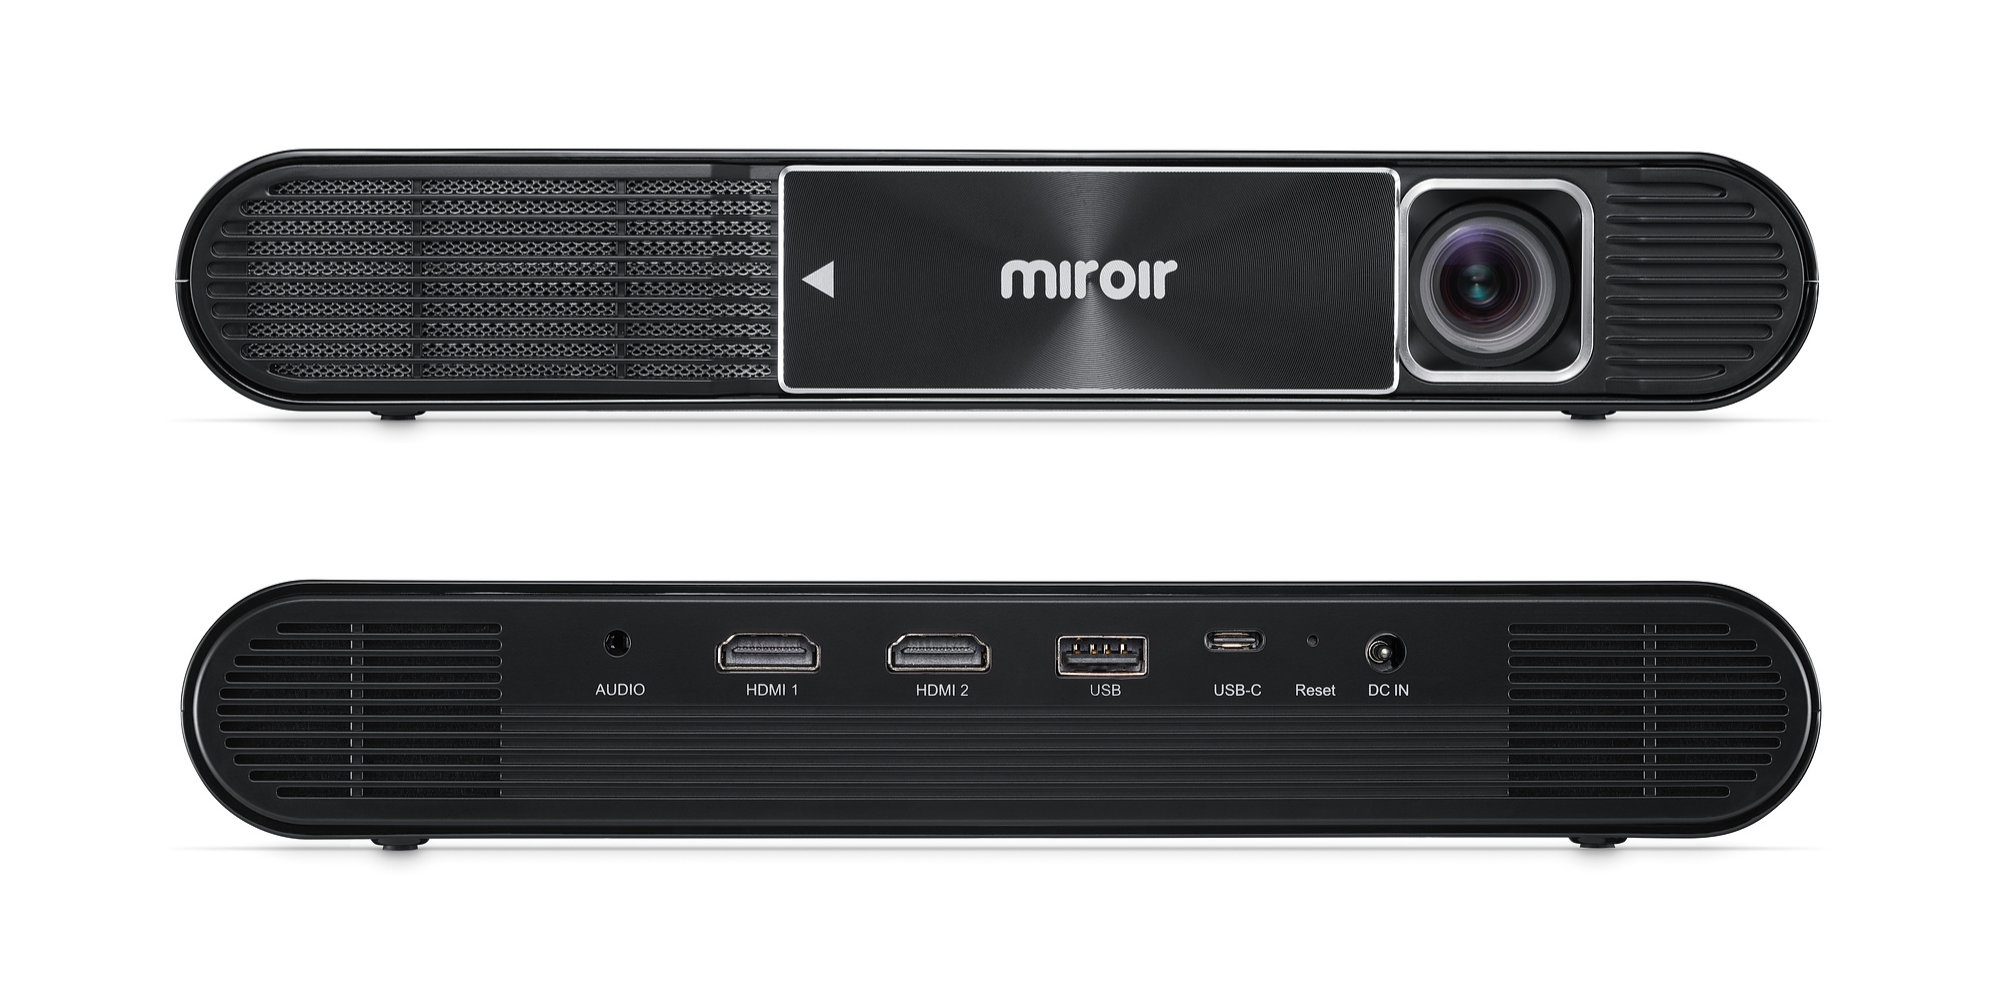 miroir micro projector element series connect to wifi